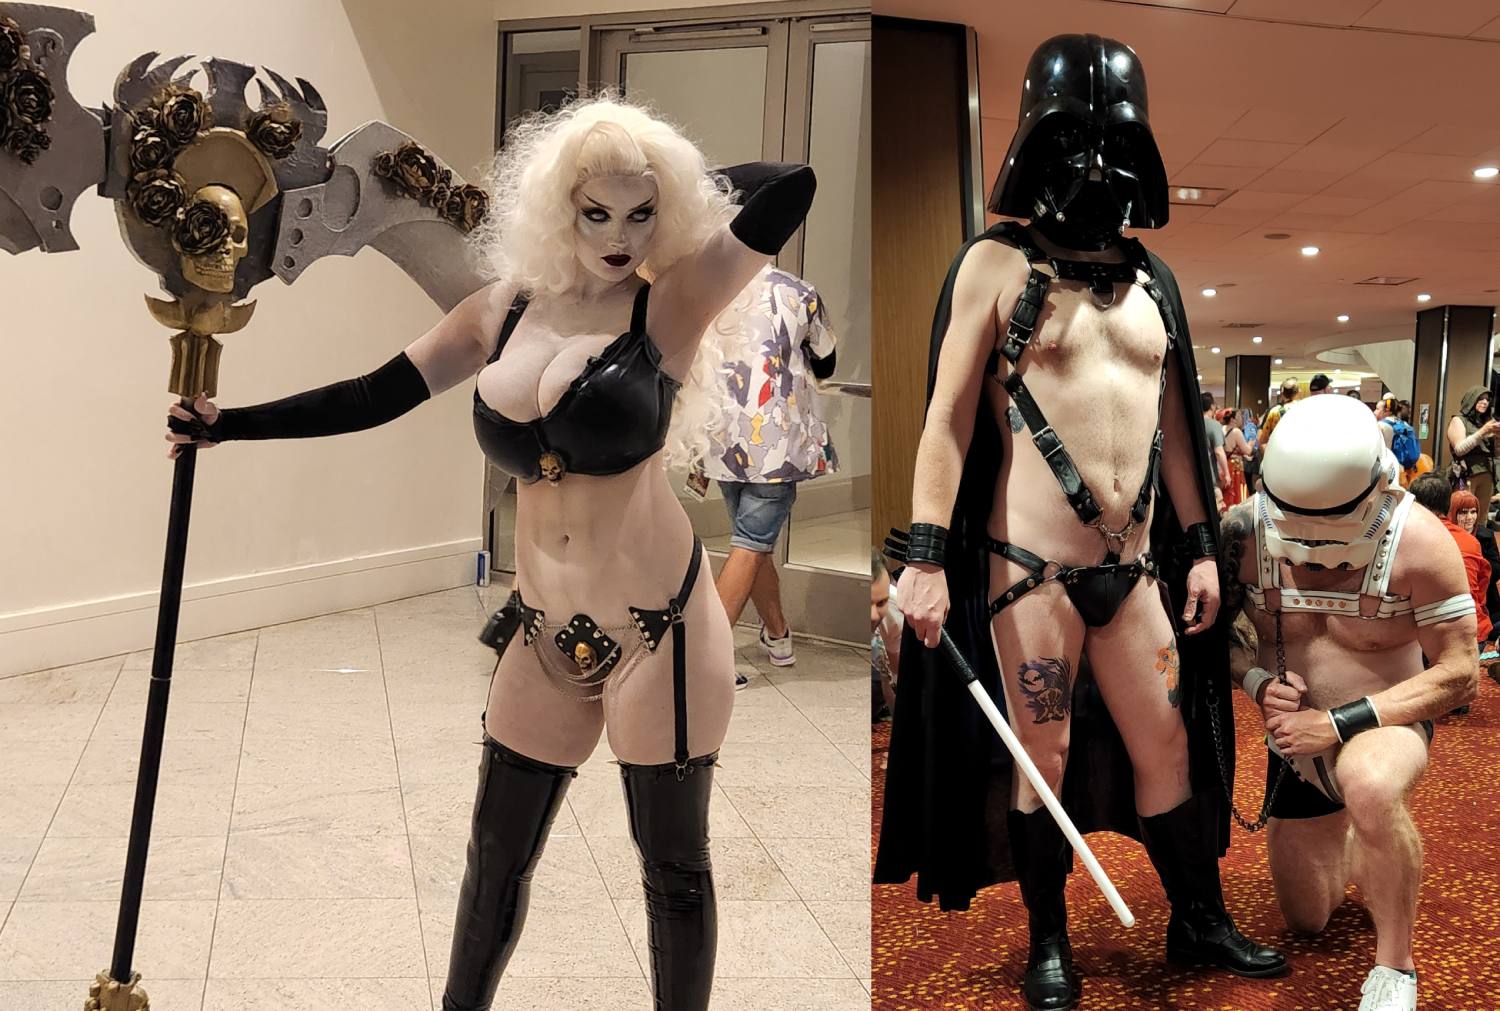 Fun With Busty Cosplay - Nerdy & Dirty: The Sexual Escapades of Comic Book Conventions -  Philadelphia Weekly